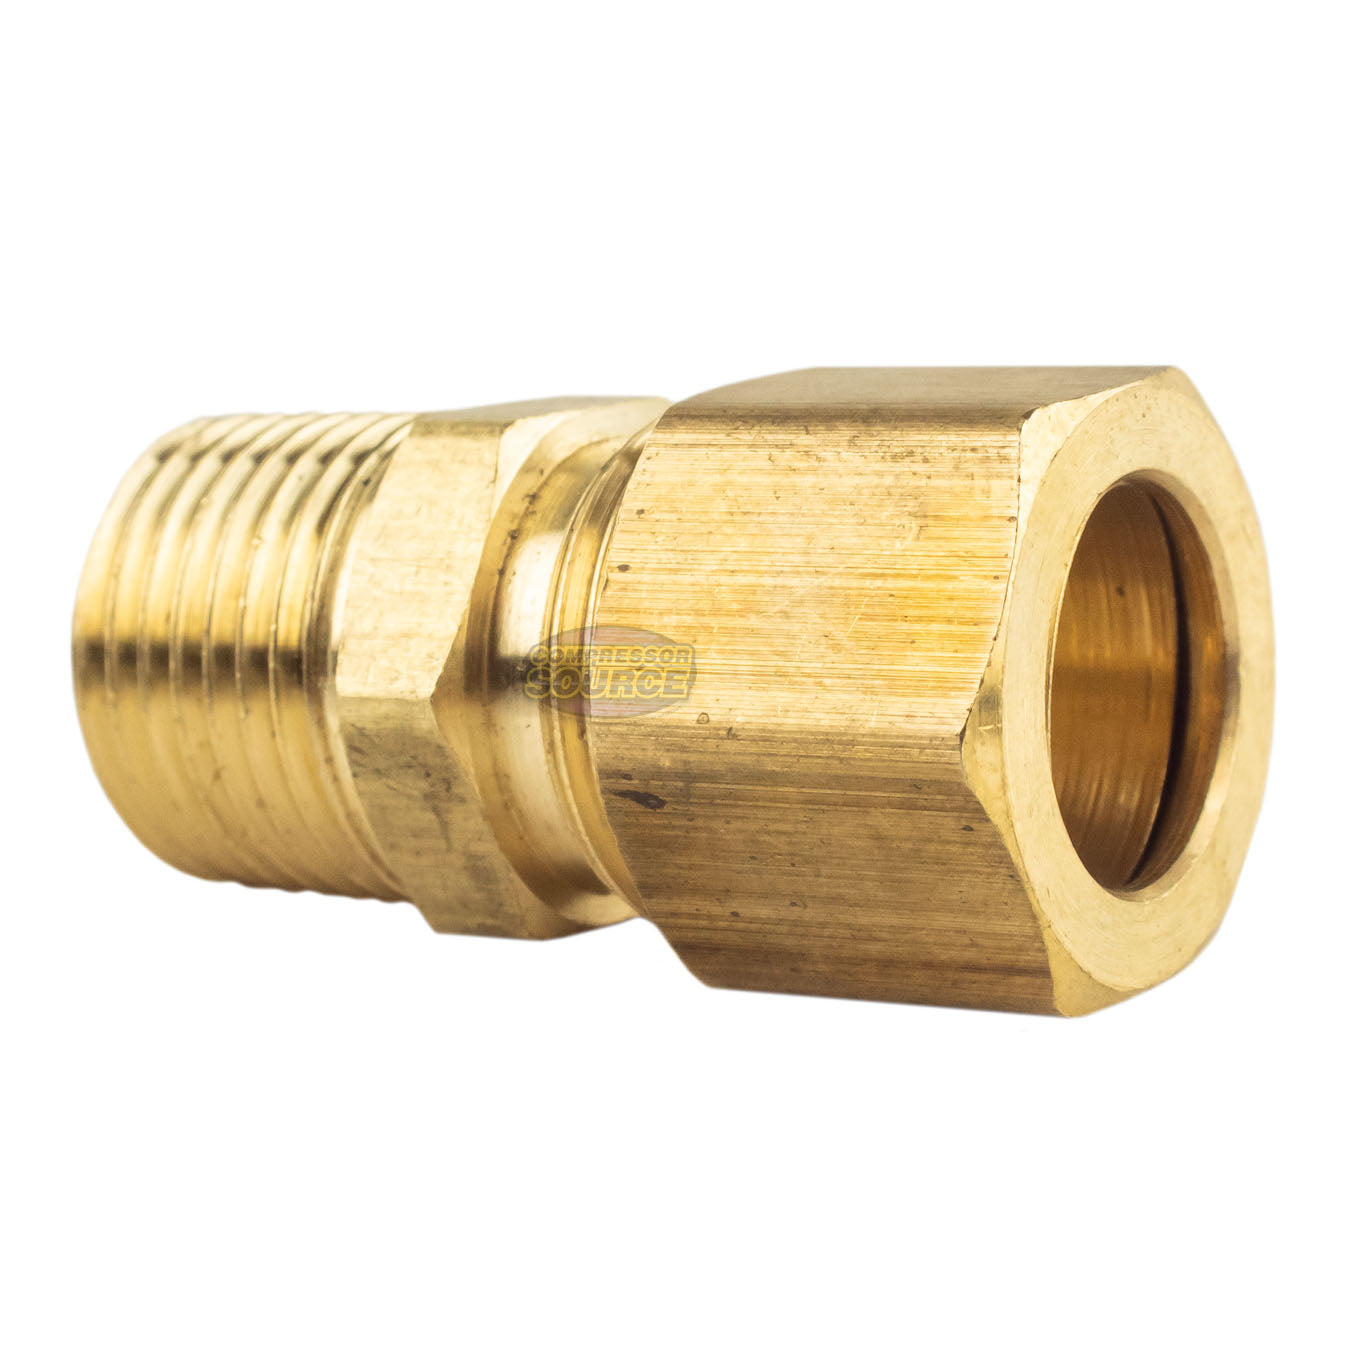 2 Pack 1/2" x 3/8" Male NPT Connector Brass Compression Fitting for 1/2" OD Tube